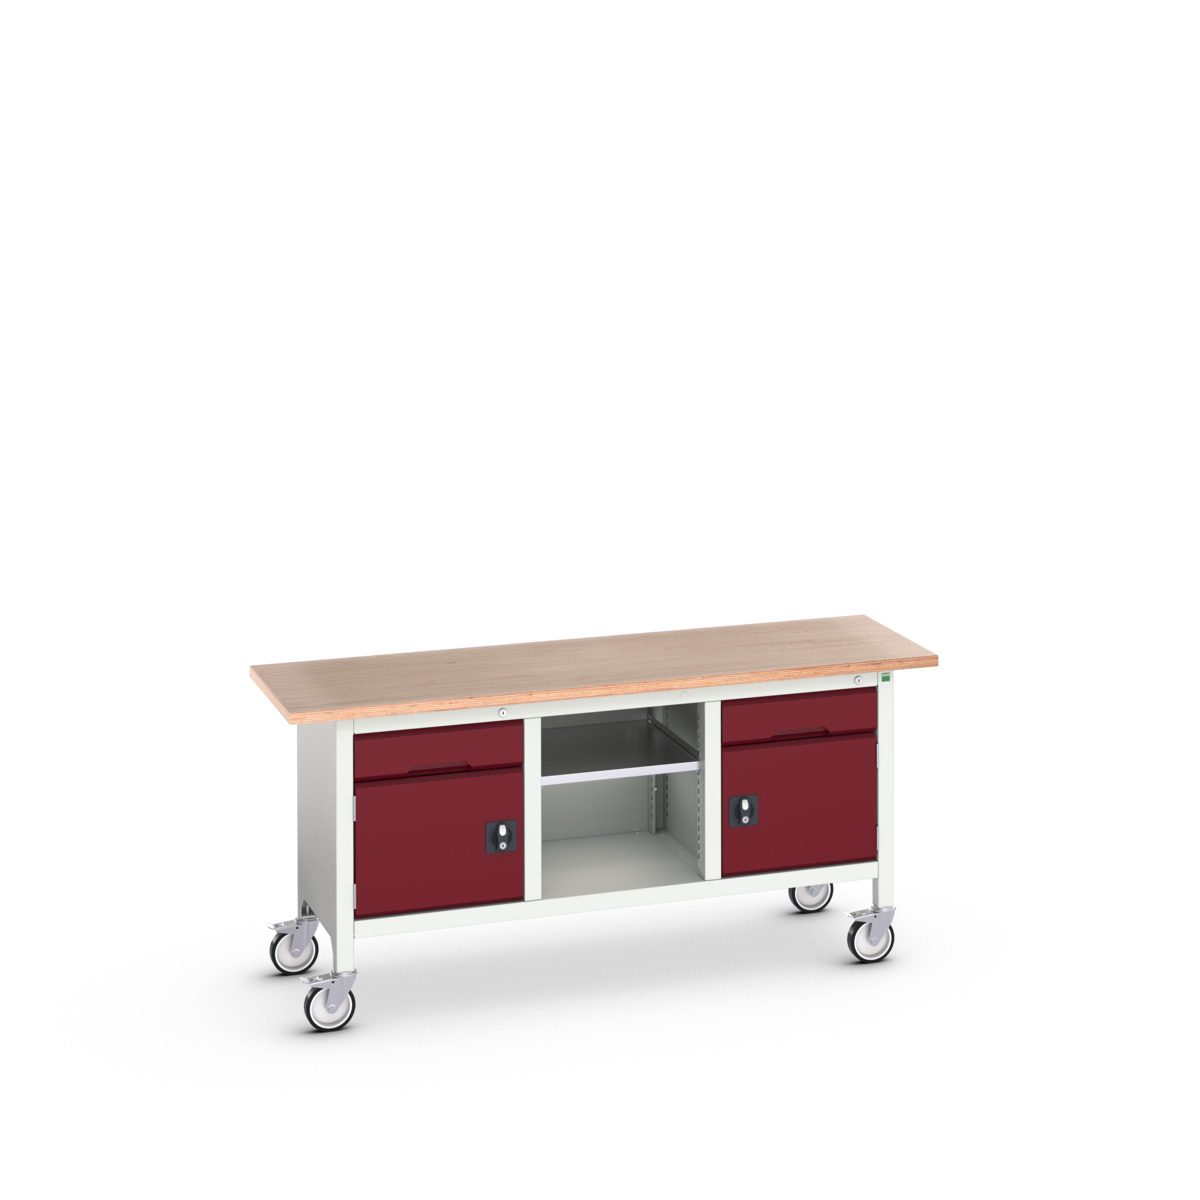 16923221.24 - verso mobile storage bench (mpx)